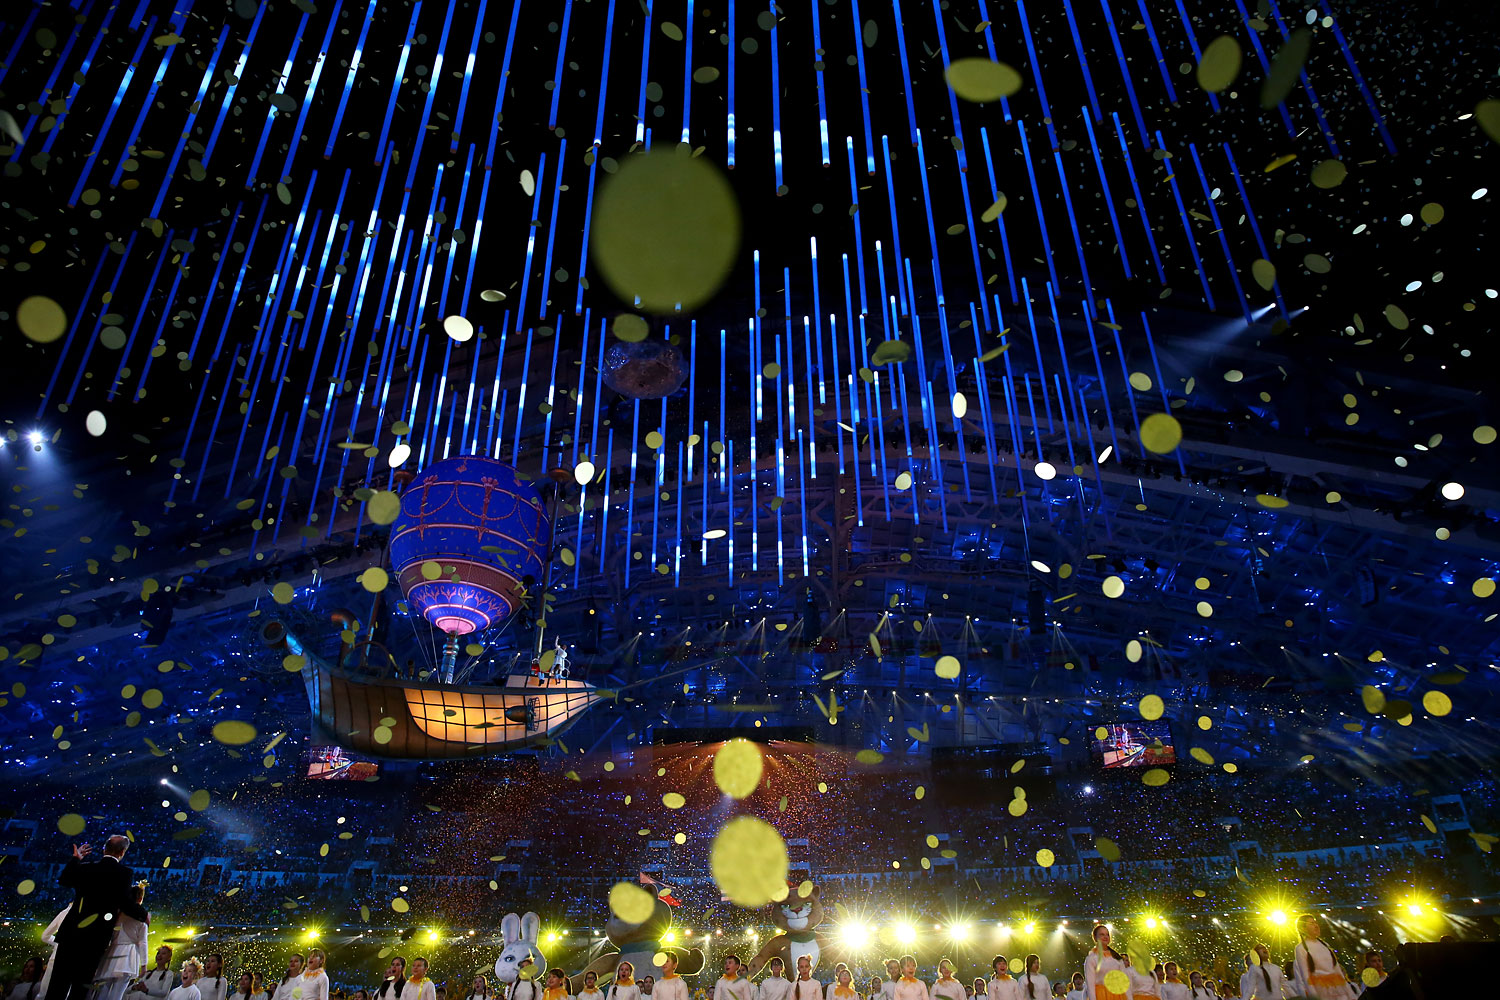 A balloon travels across the arena.